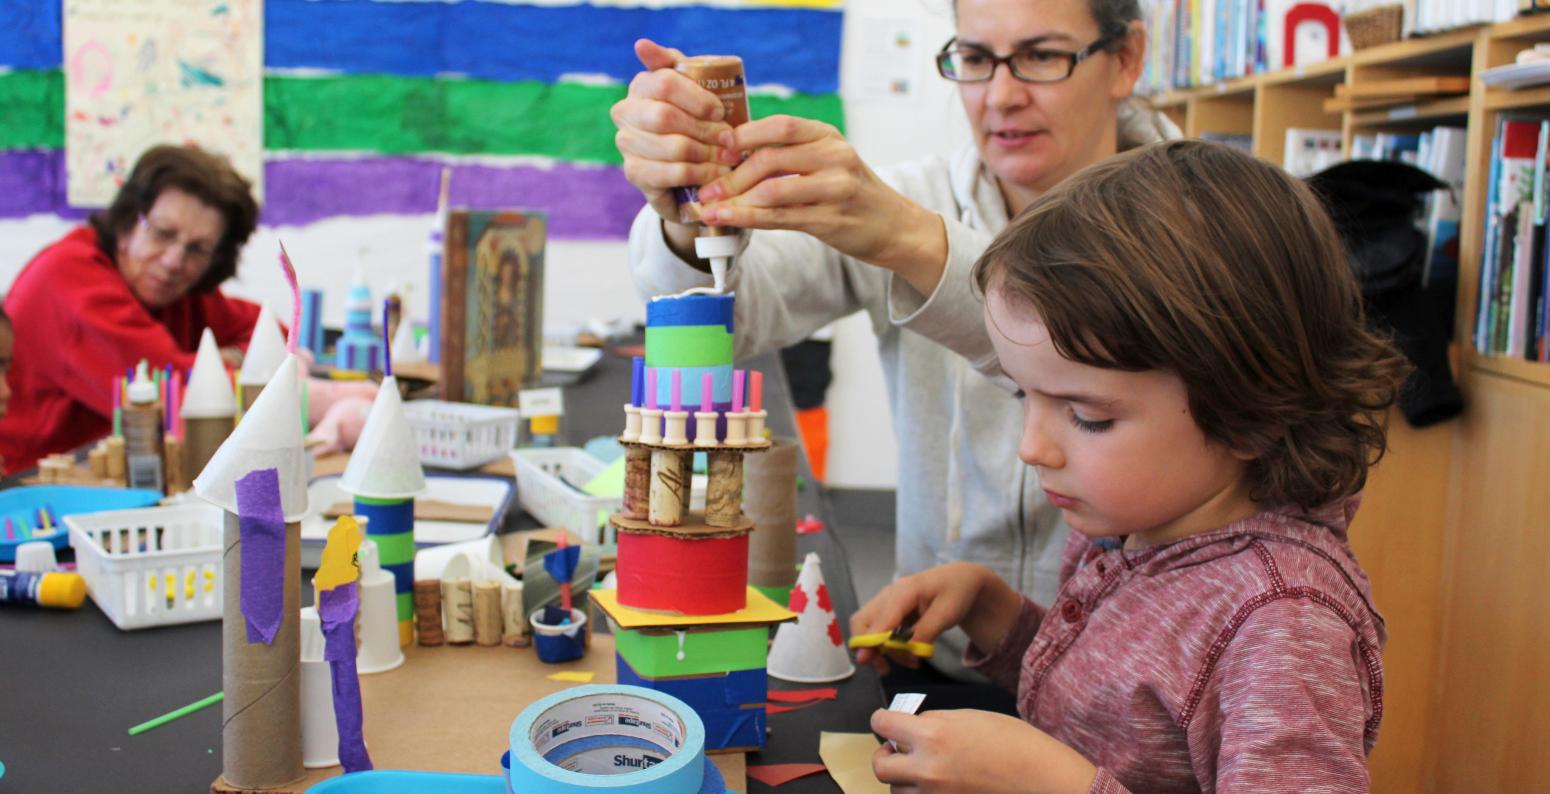 An adult and child working together to construct a tower sculpture.